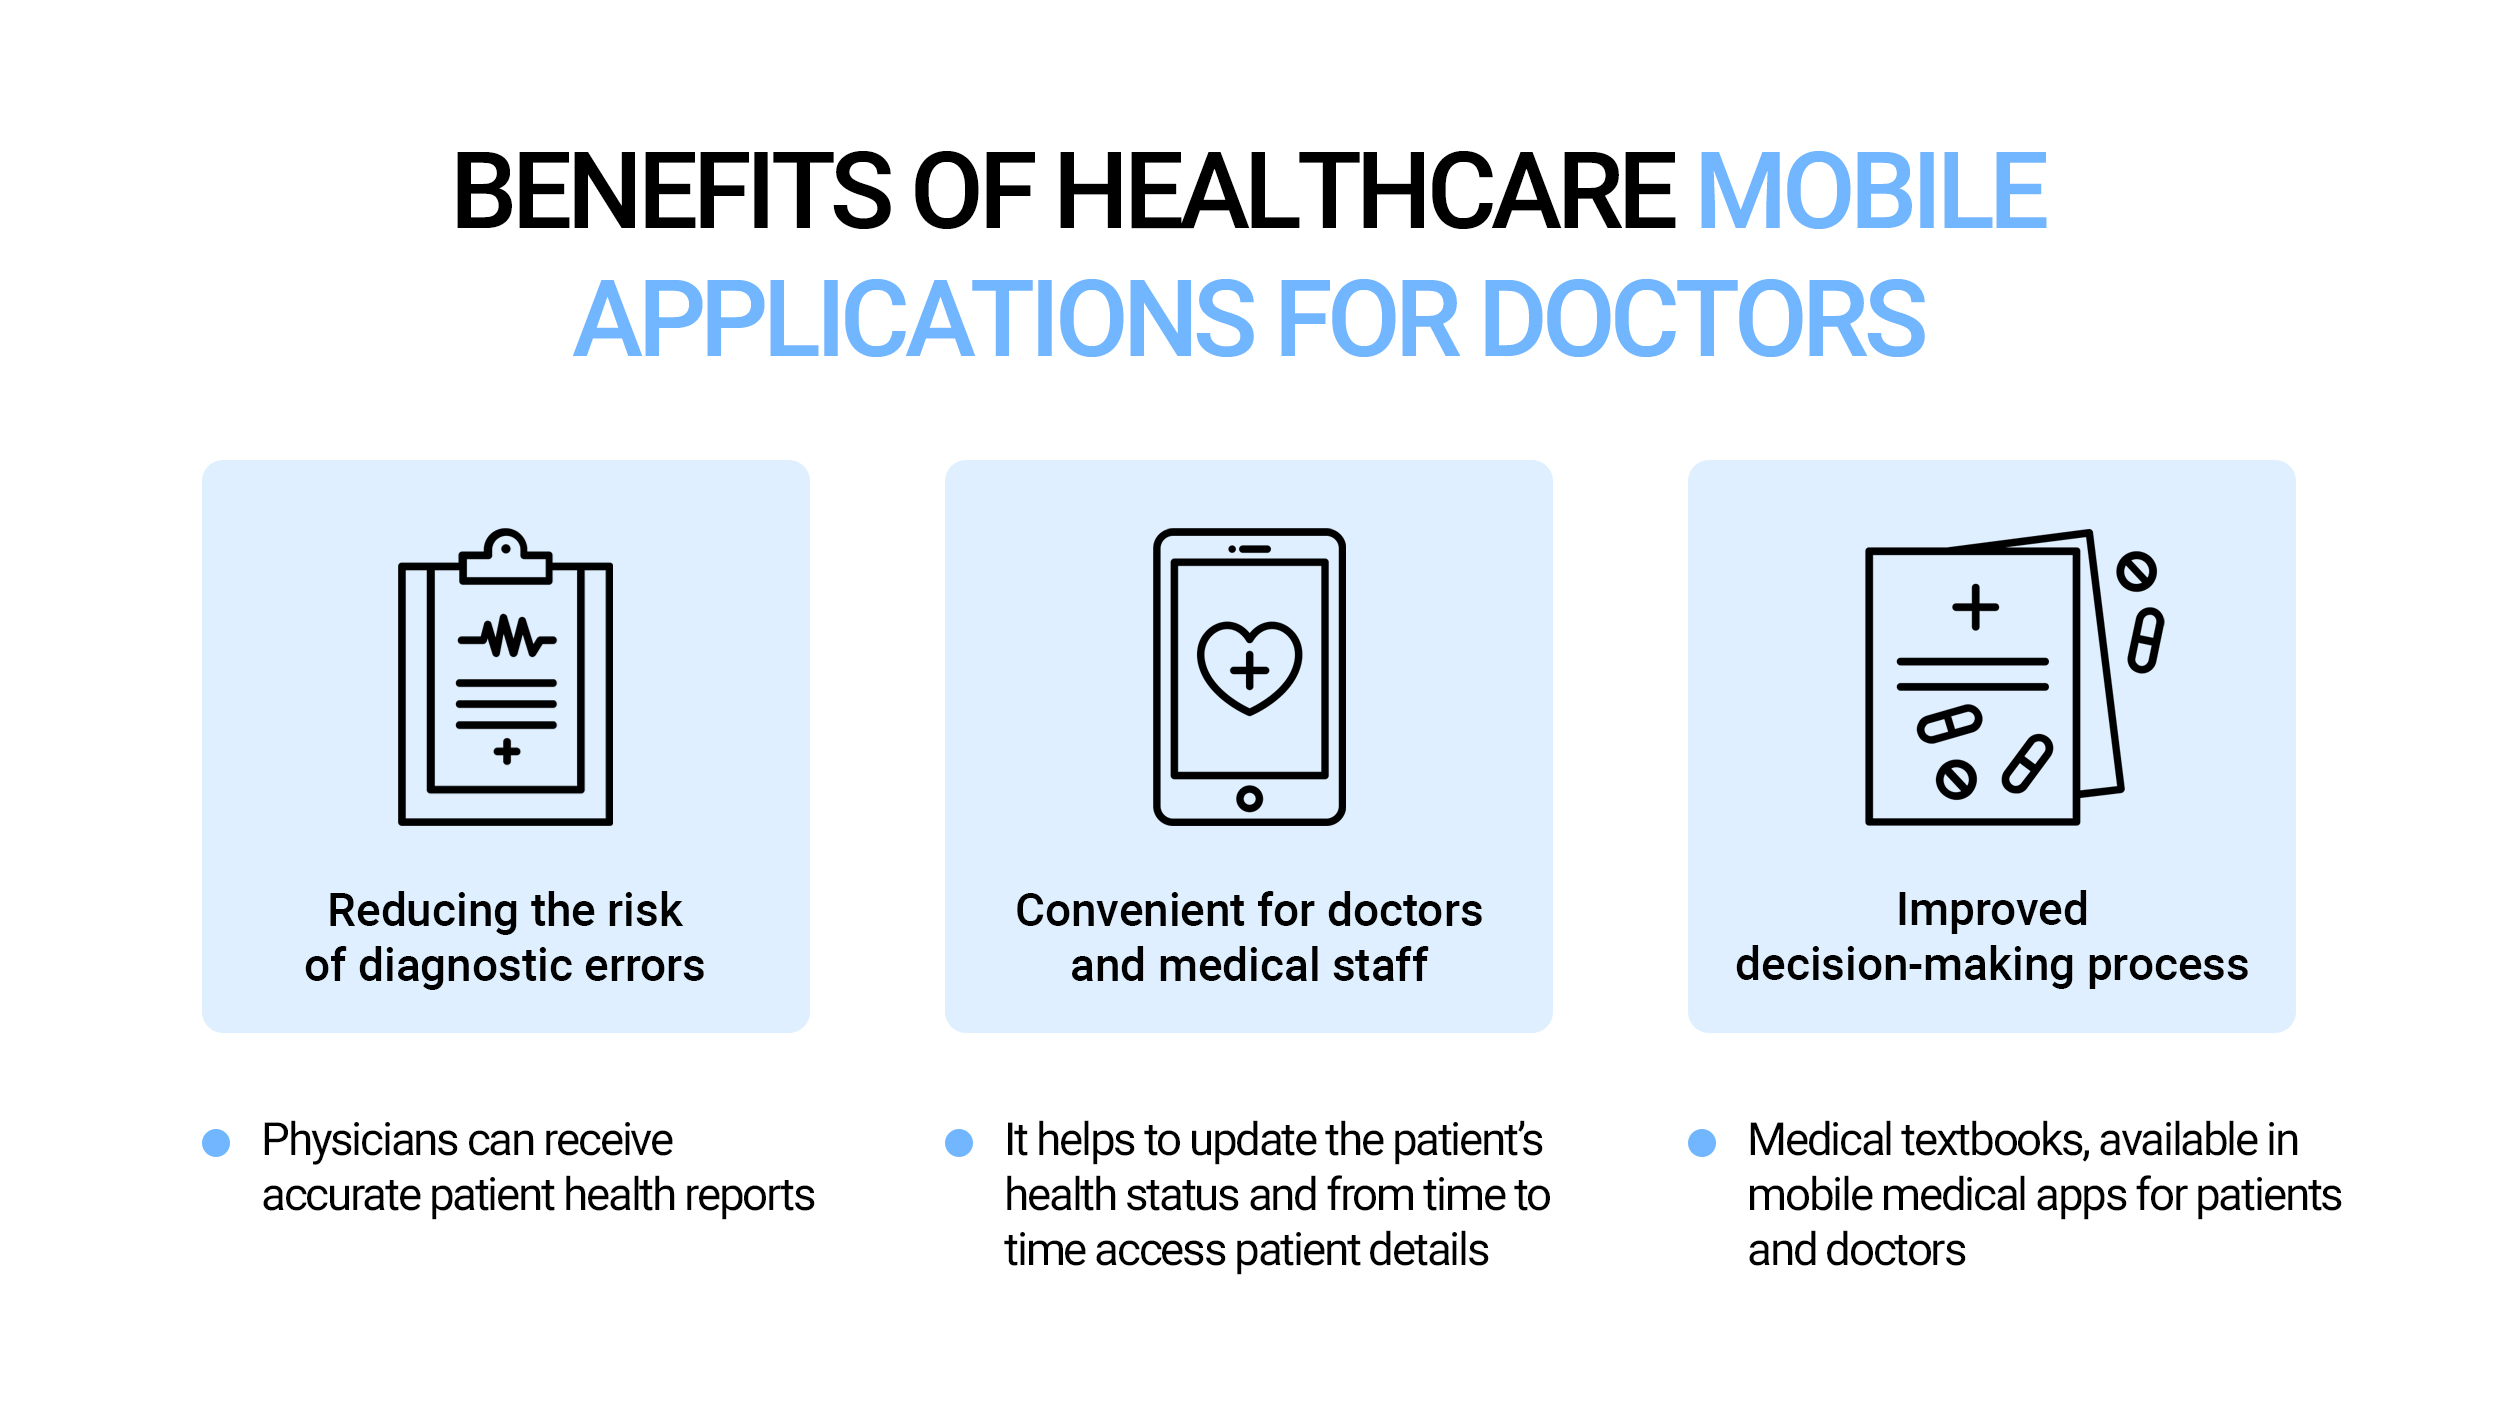 Benefits of healthcare mobile applications for doctors